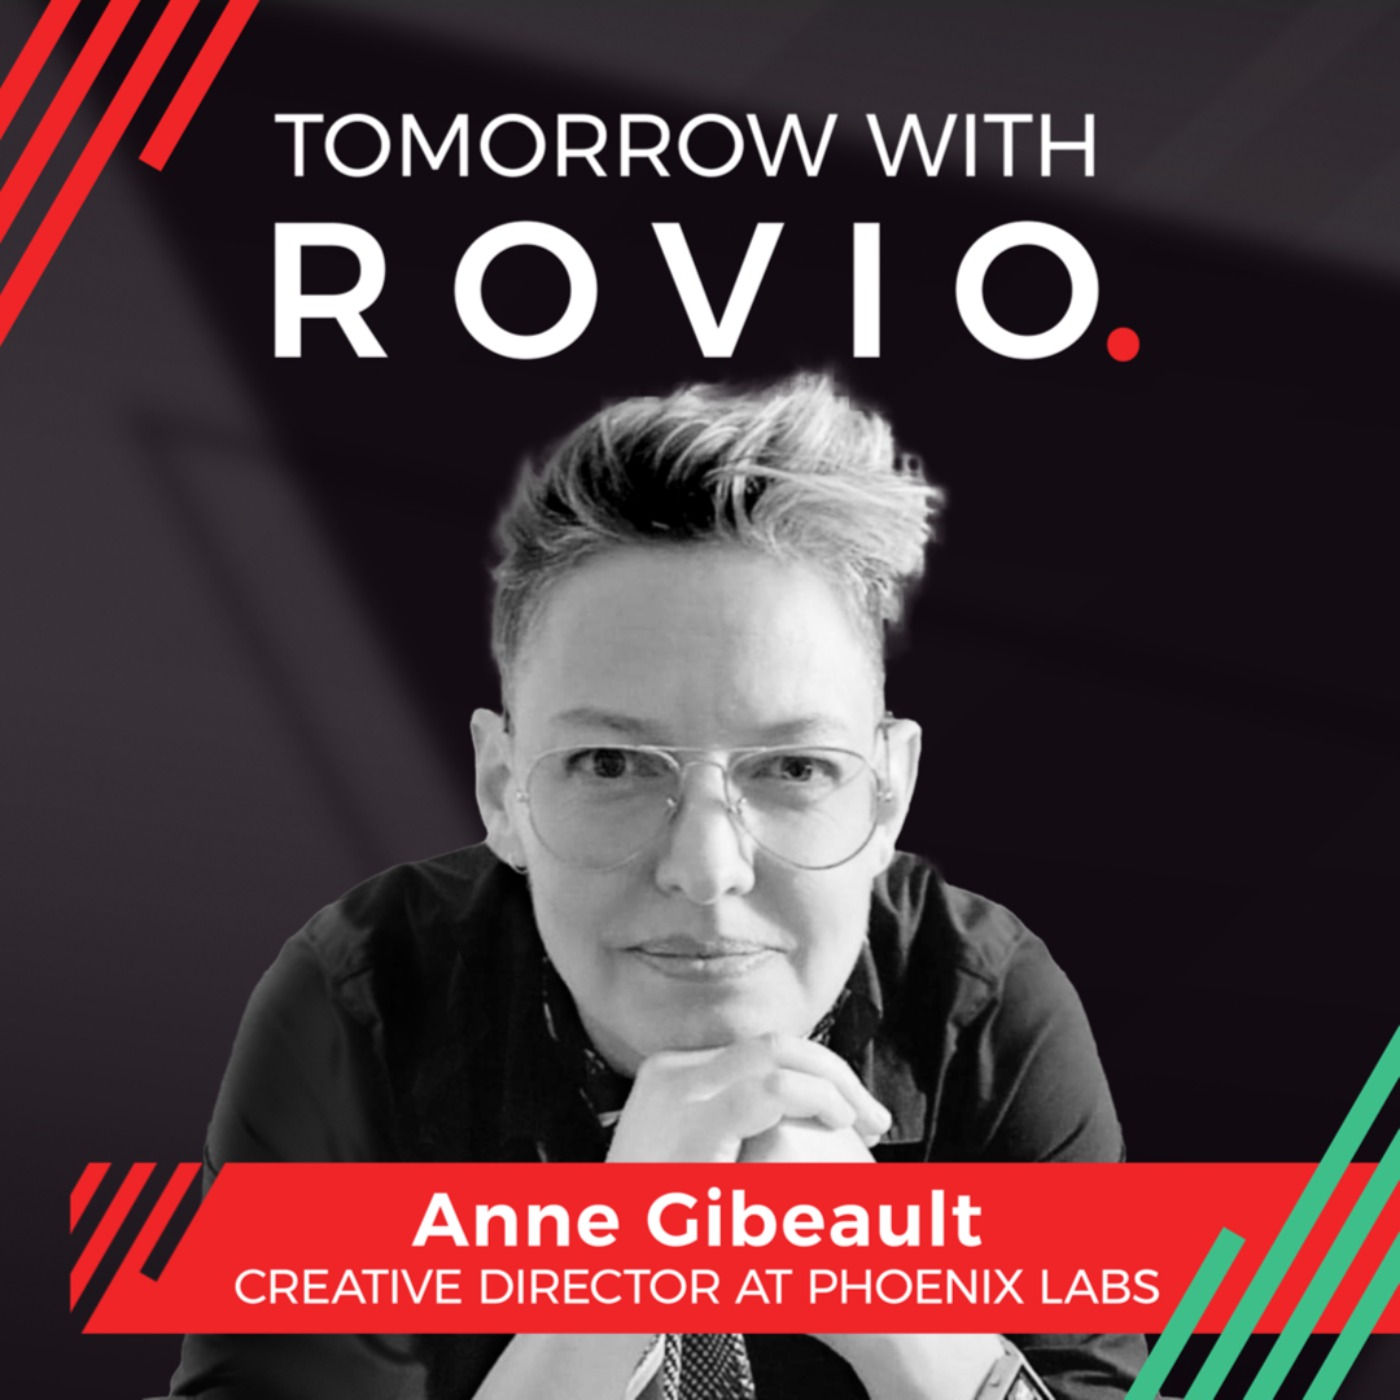 Anne Gibeault - Creative Director at Phoenix Labs